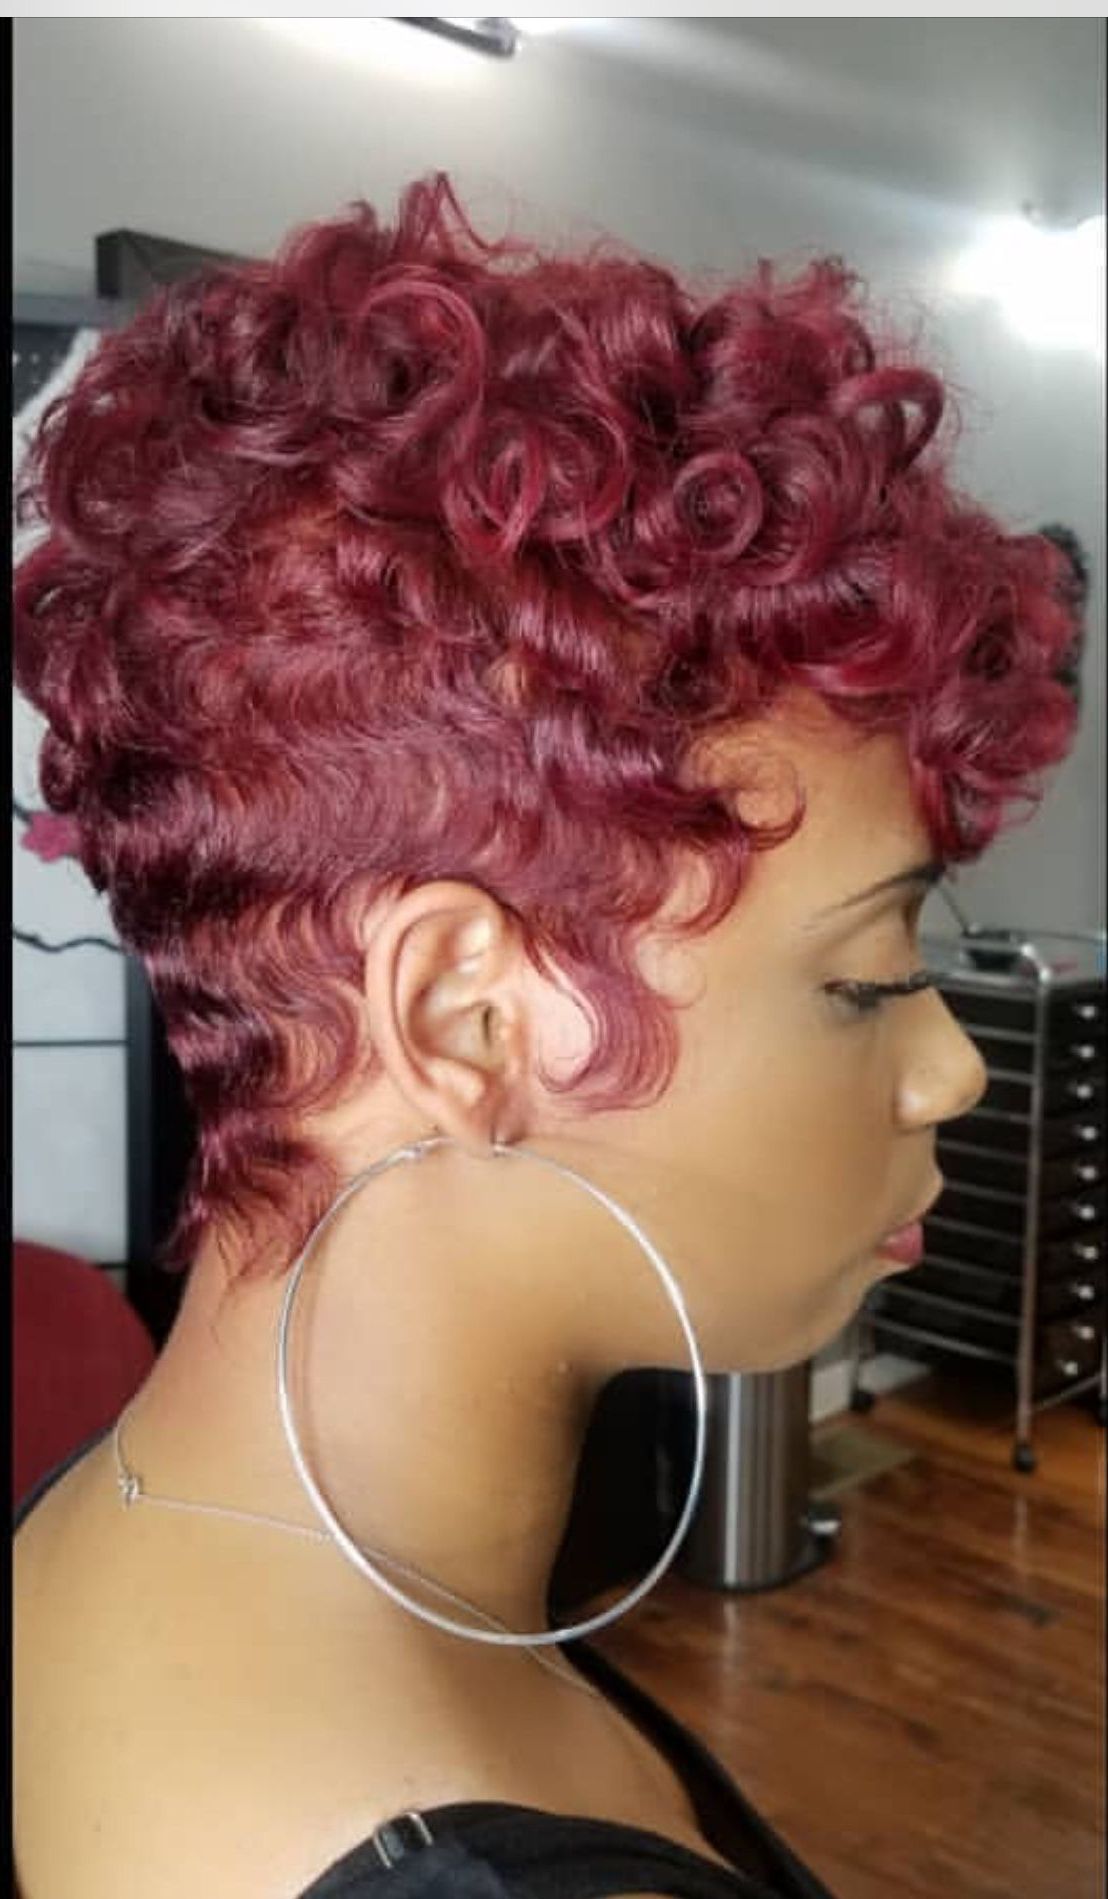 Pinangela Garnett On Hair In 2018 | Pinterest | Short Hair With Regard To Red And Black Short Hairstyles (View 4 of 25)